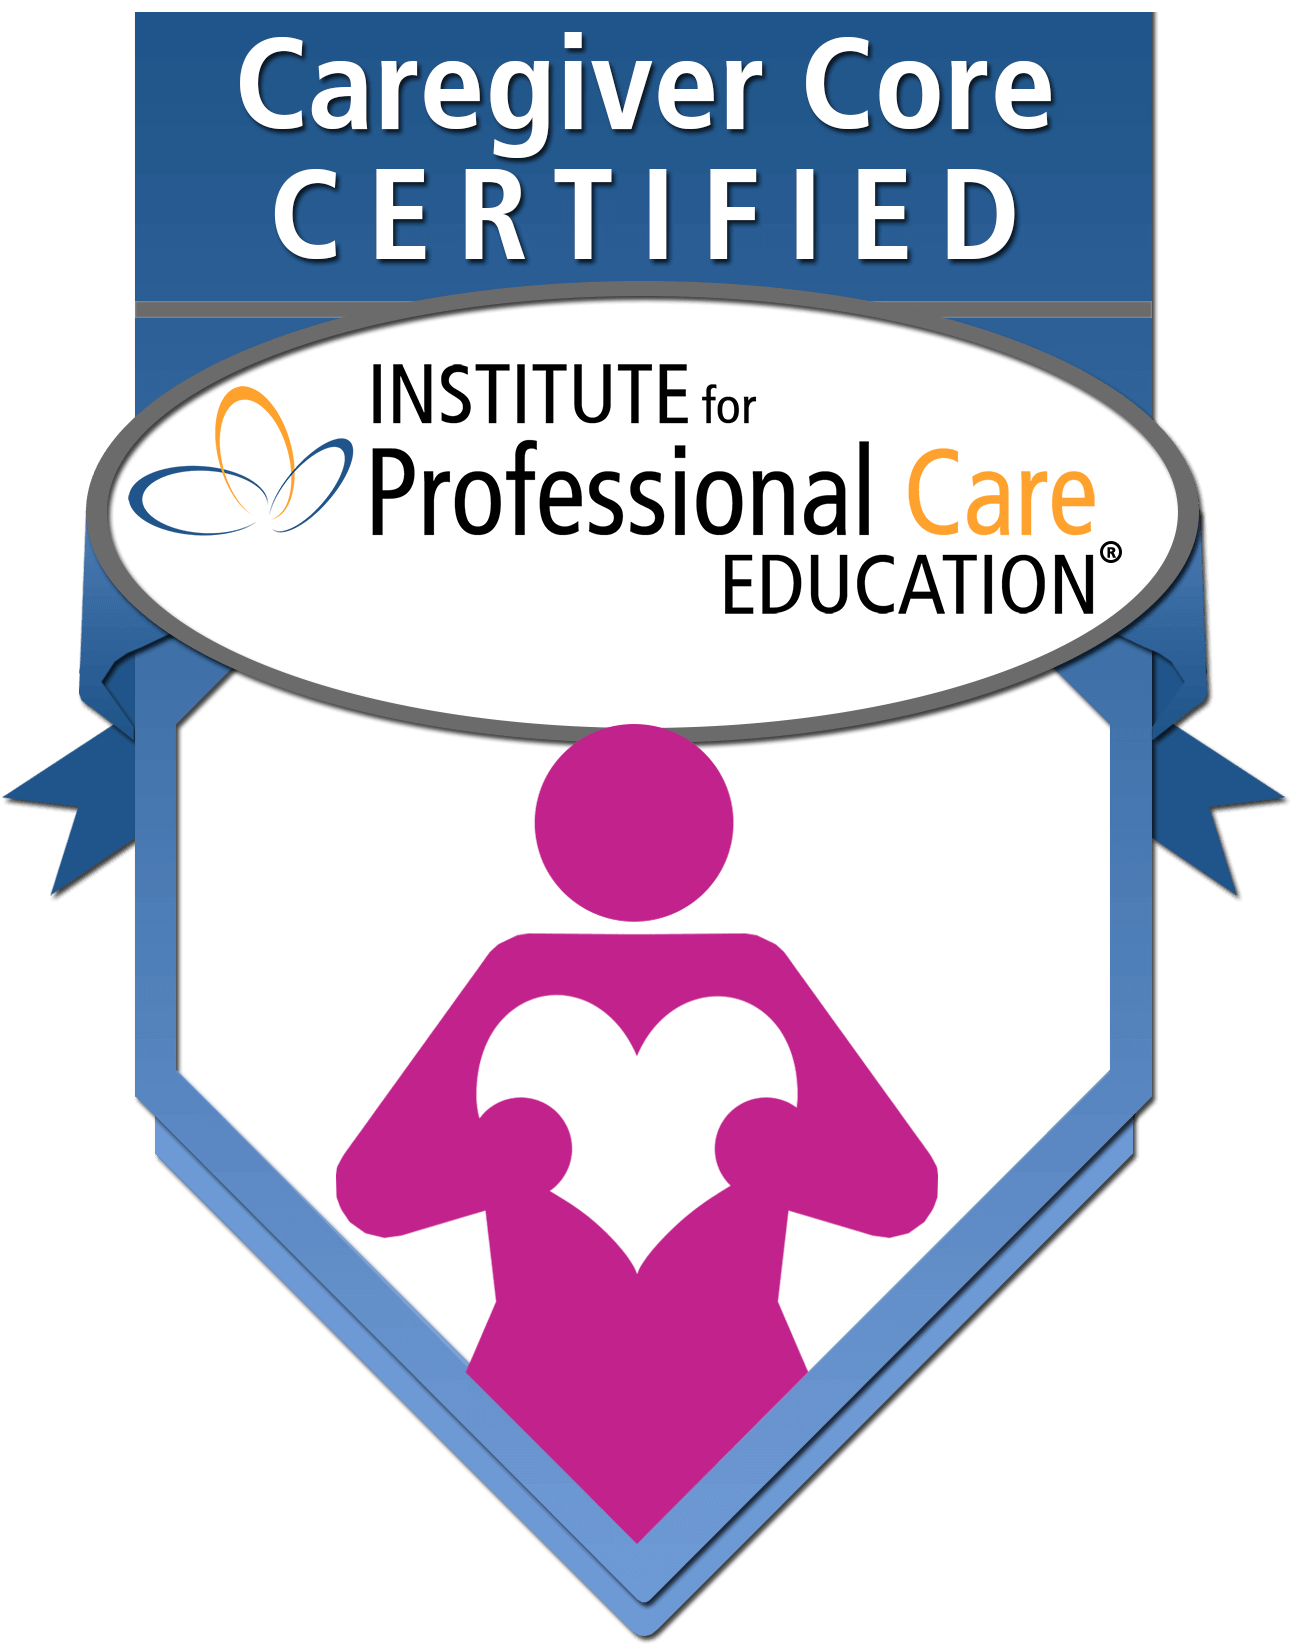 Homecare Agency is Caregiver Core Certified by Institute for Professional Care Education